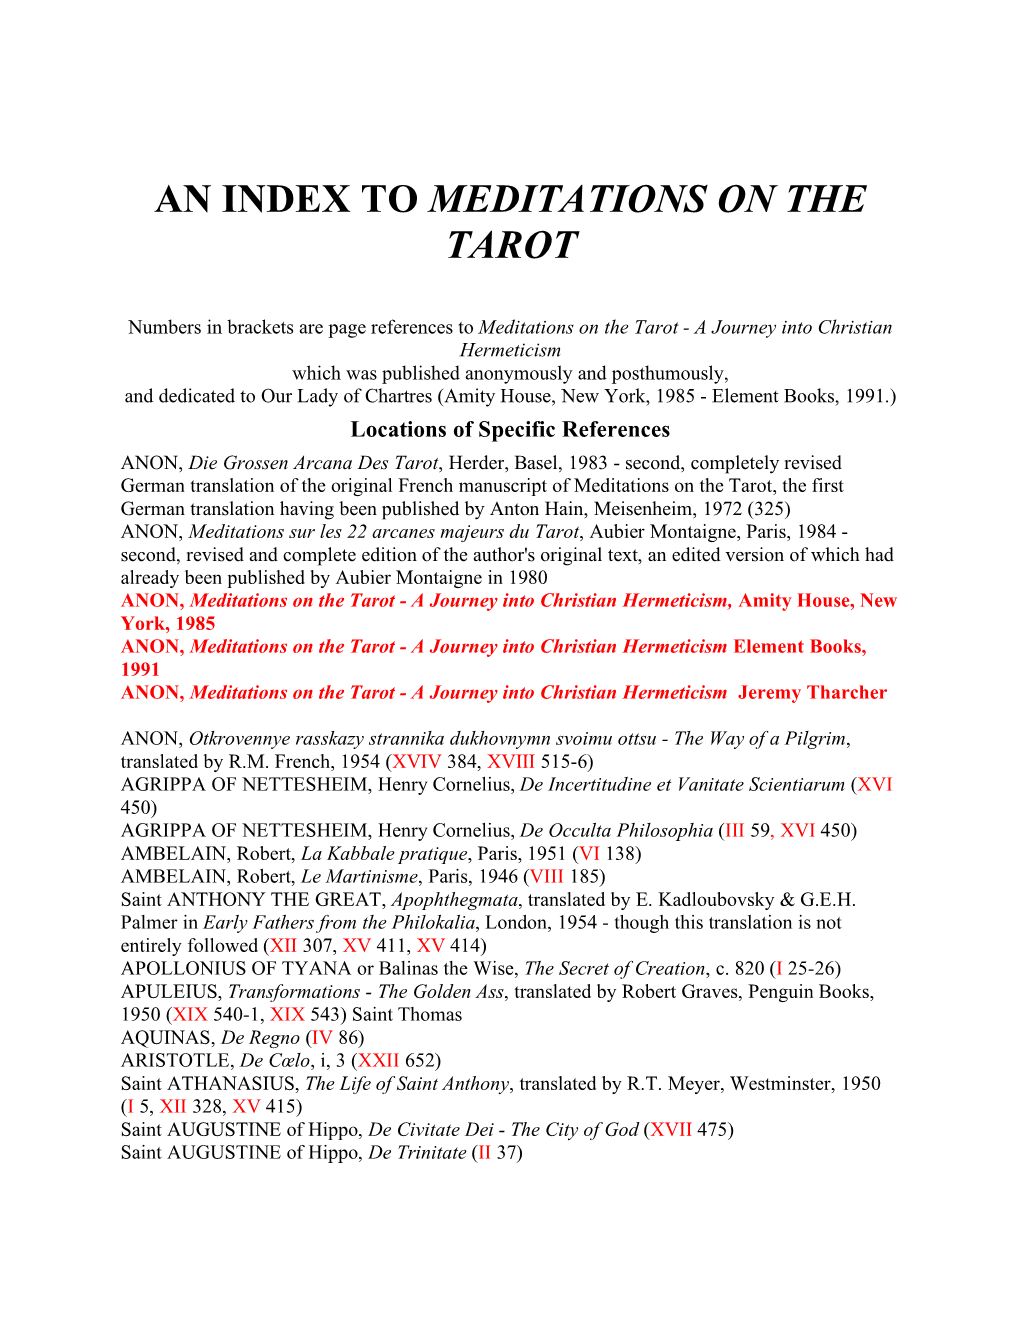 An Index to Meditations on the Tarot